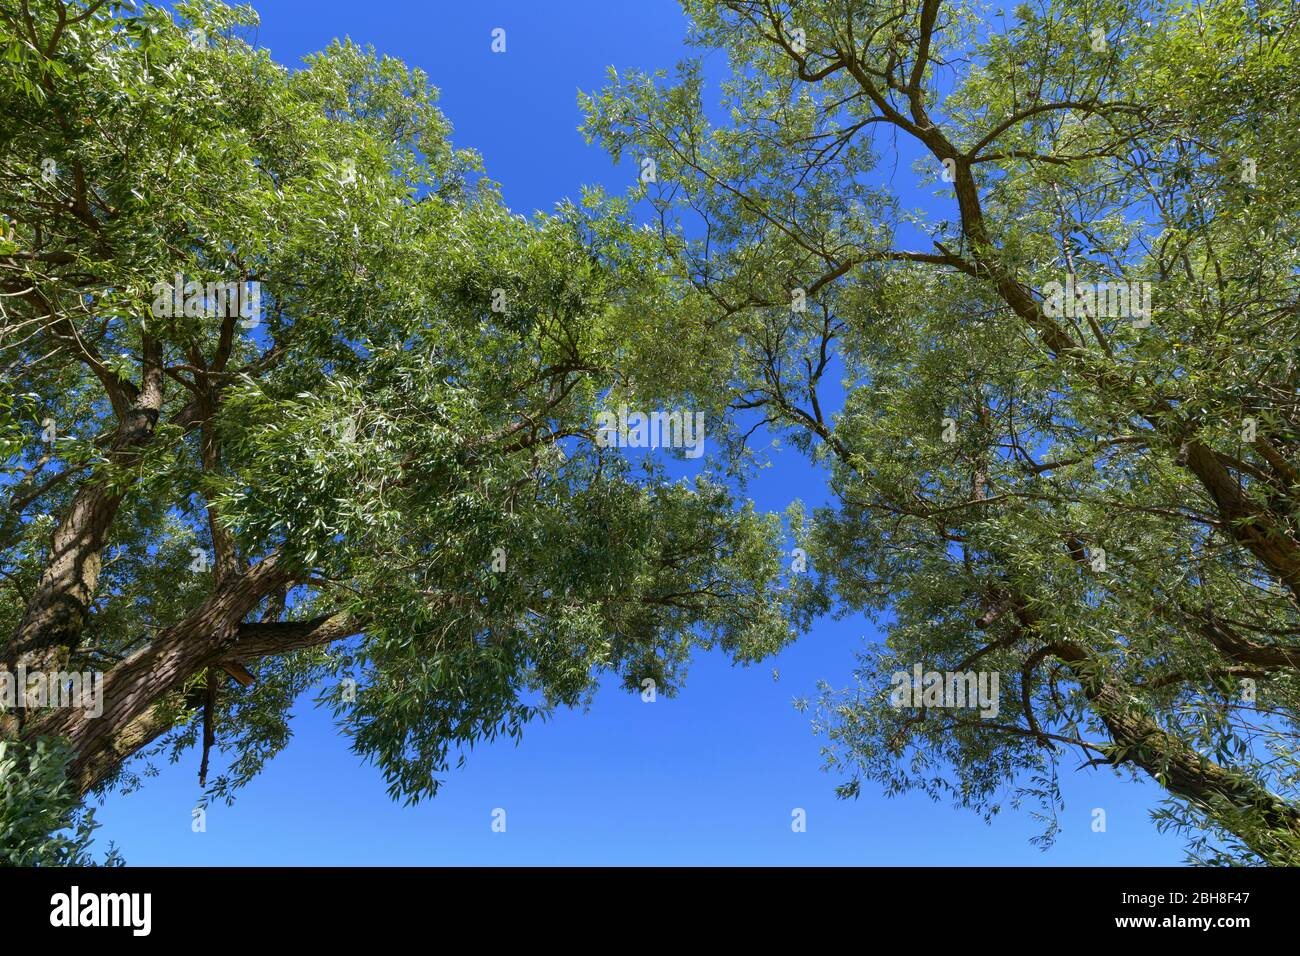 Look into the tops of two willow trees, Germerode, Werra-Meissner district, Hesse, Germany Stock Photo